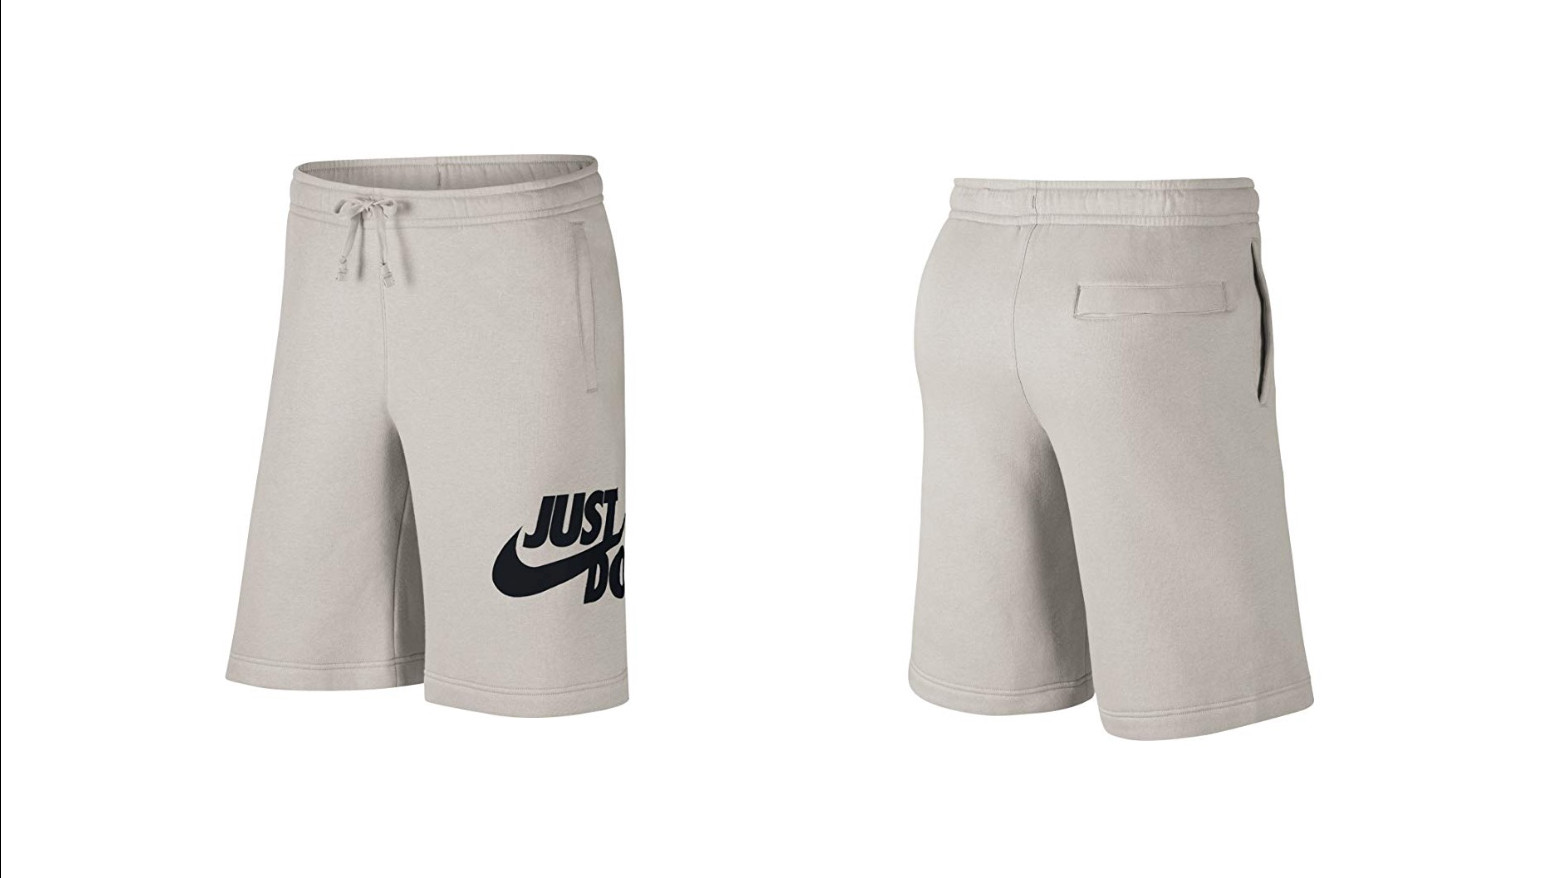 10 Nike Sweatpant Shorts You Need in Your Festival Bag | Heavy.com